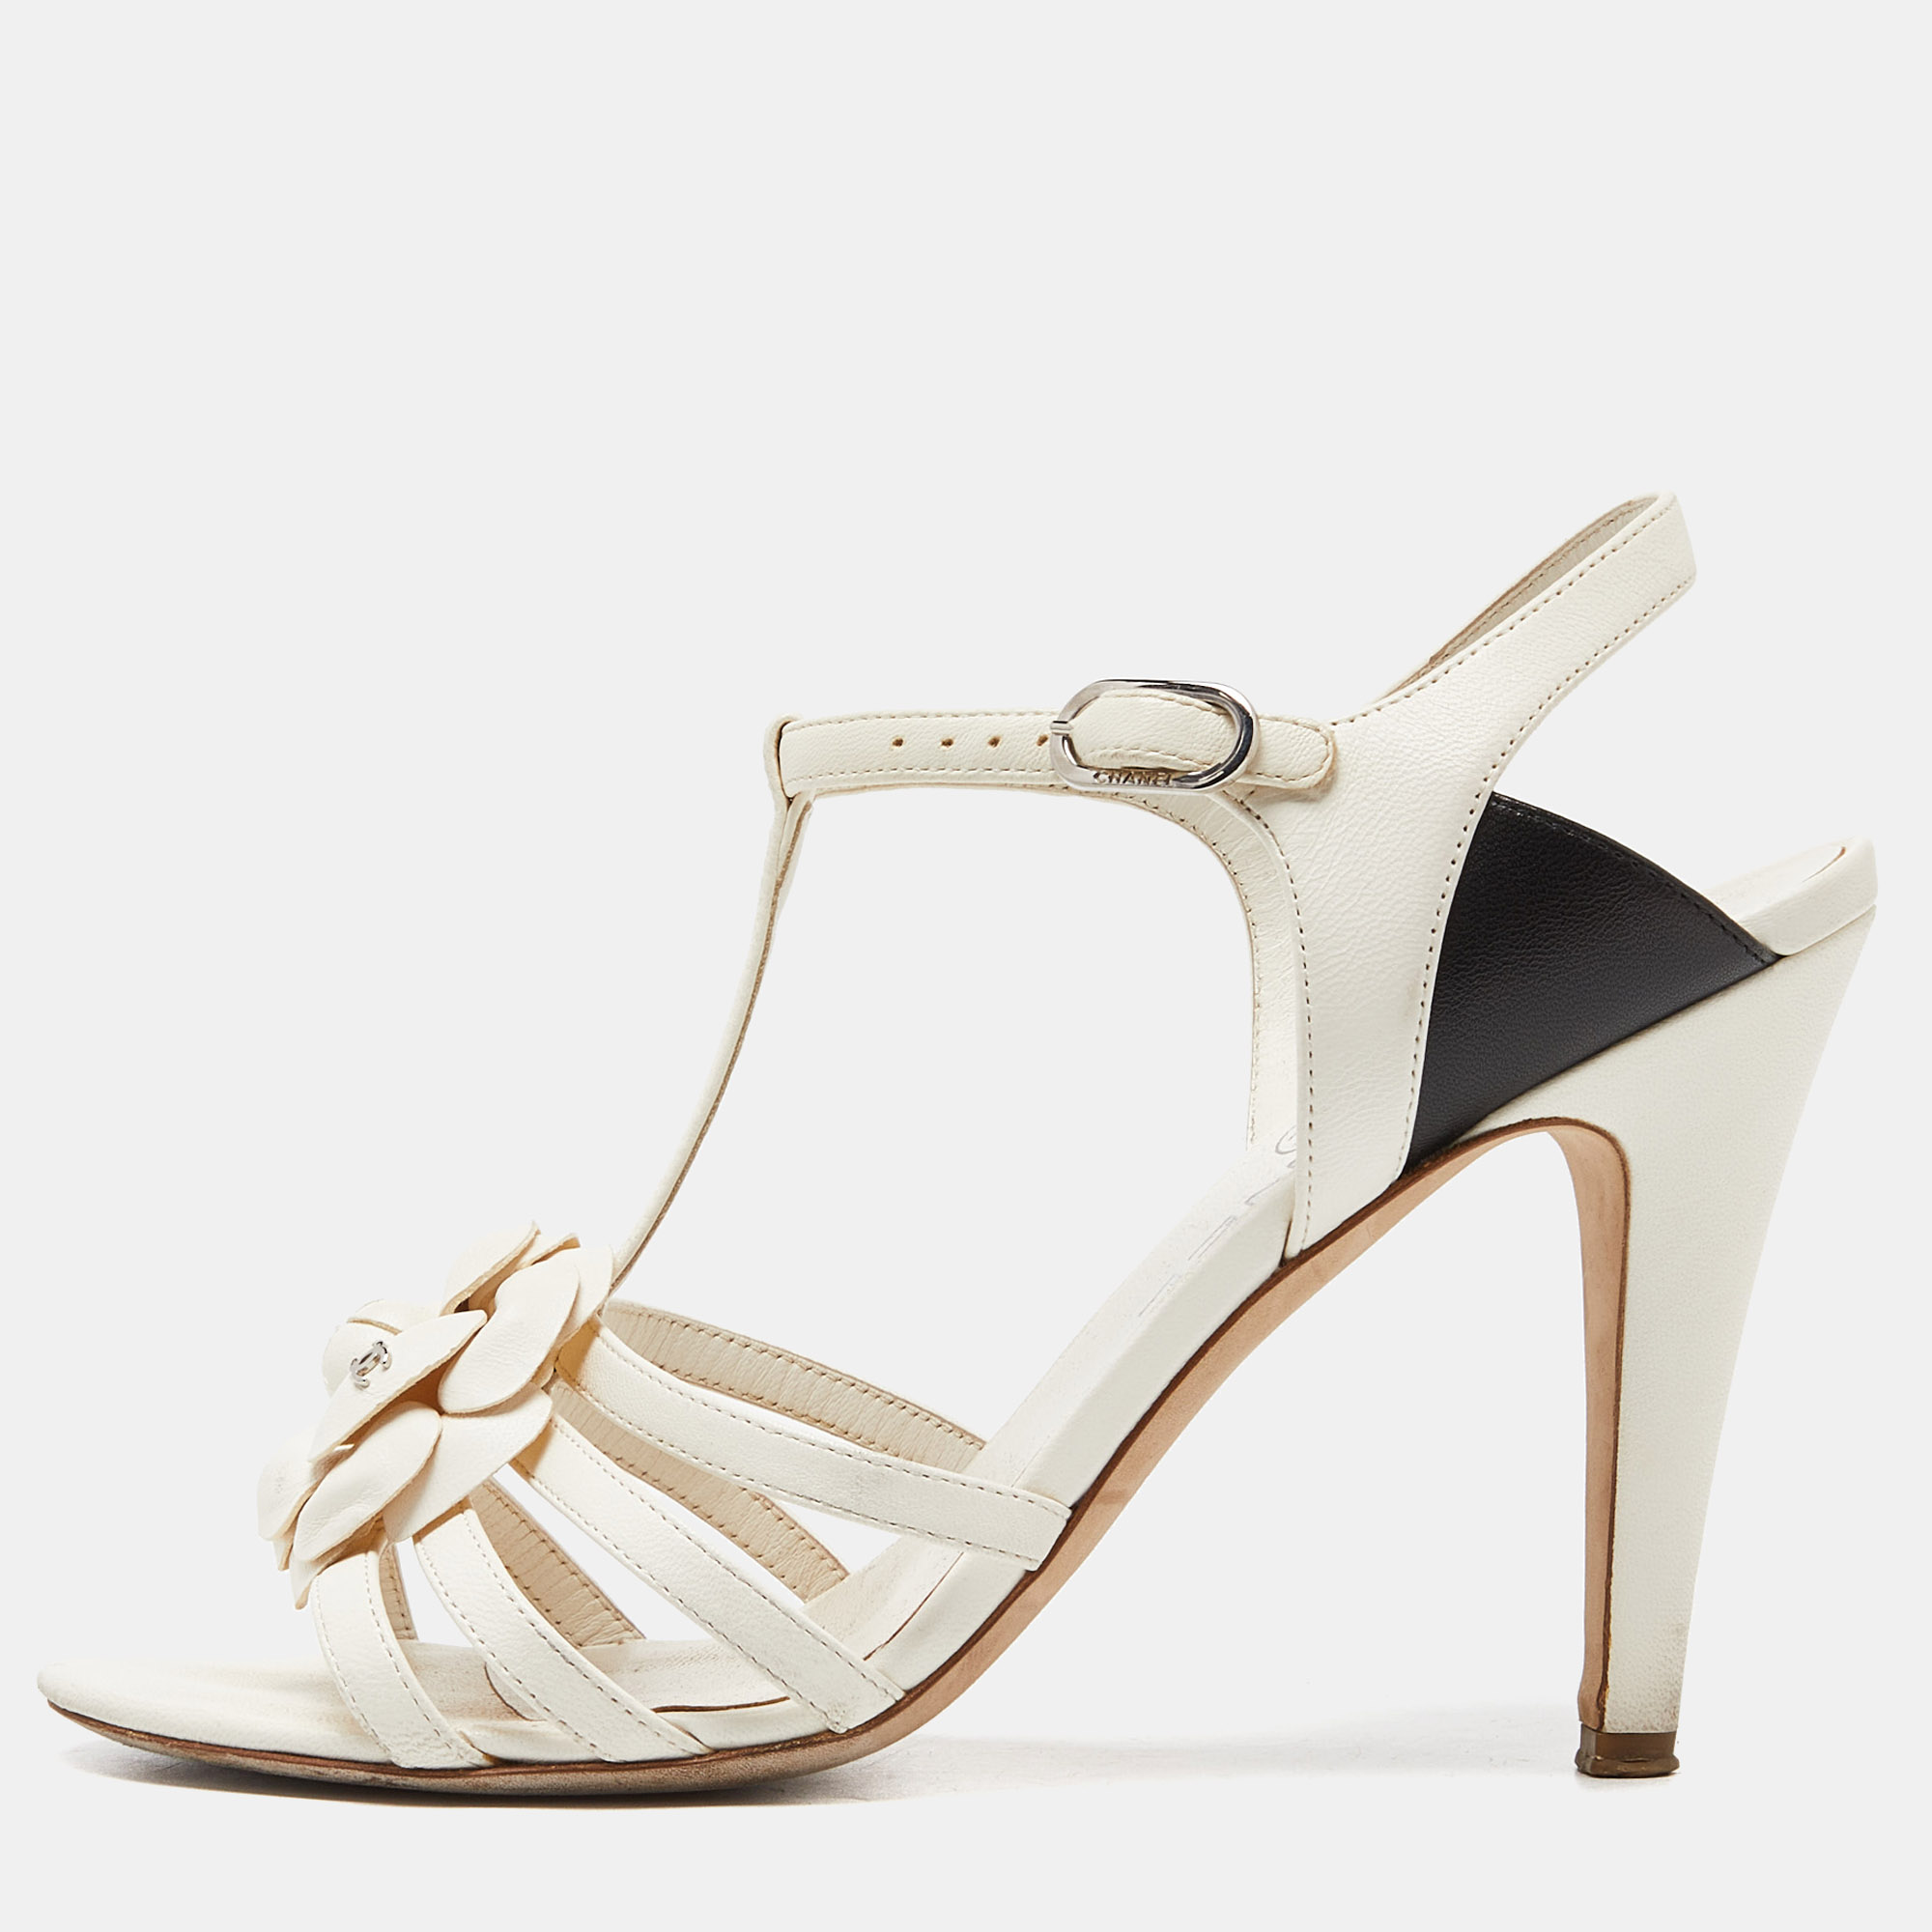 

Chanel Off White/Black Leather Camellia Ankle Strap Sandals Size